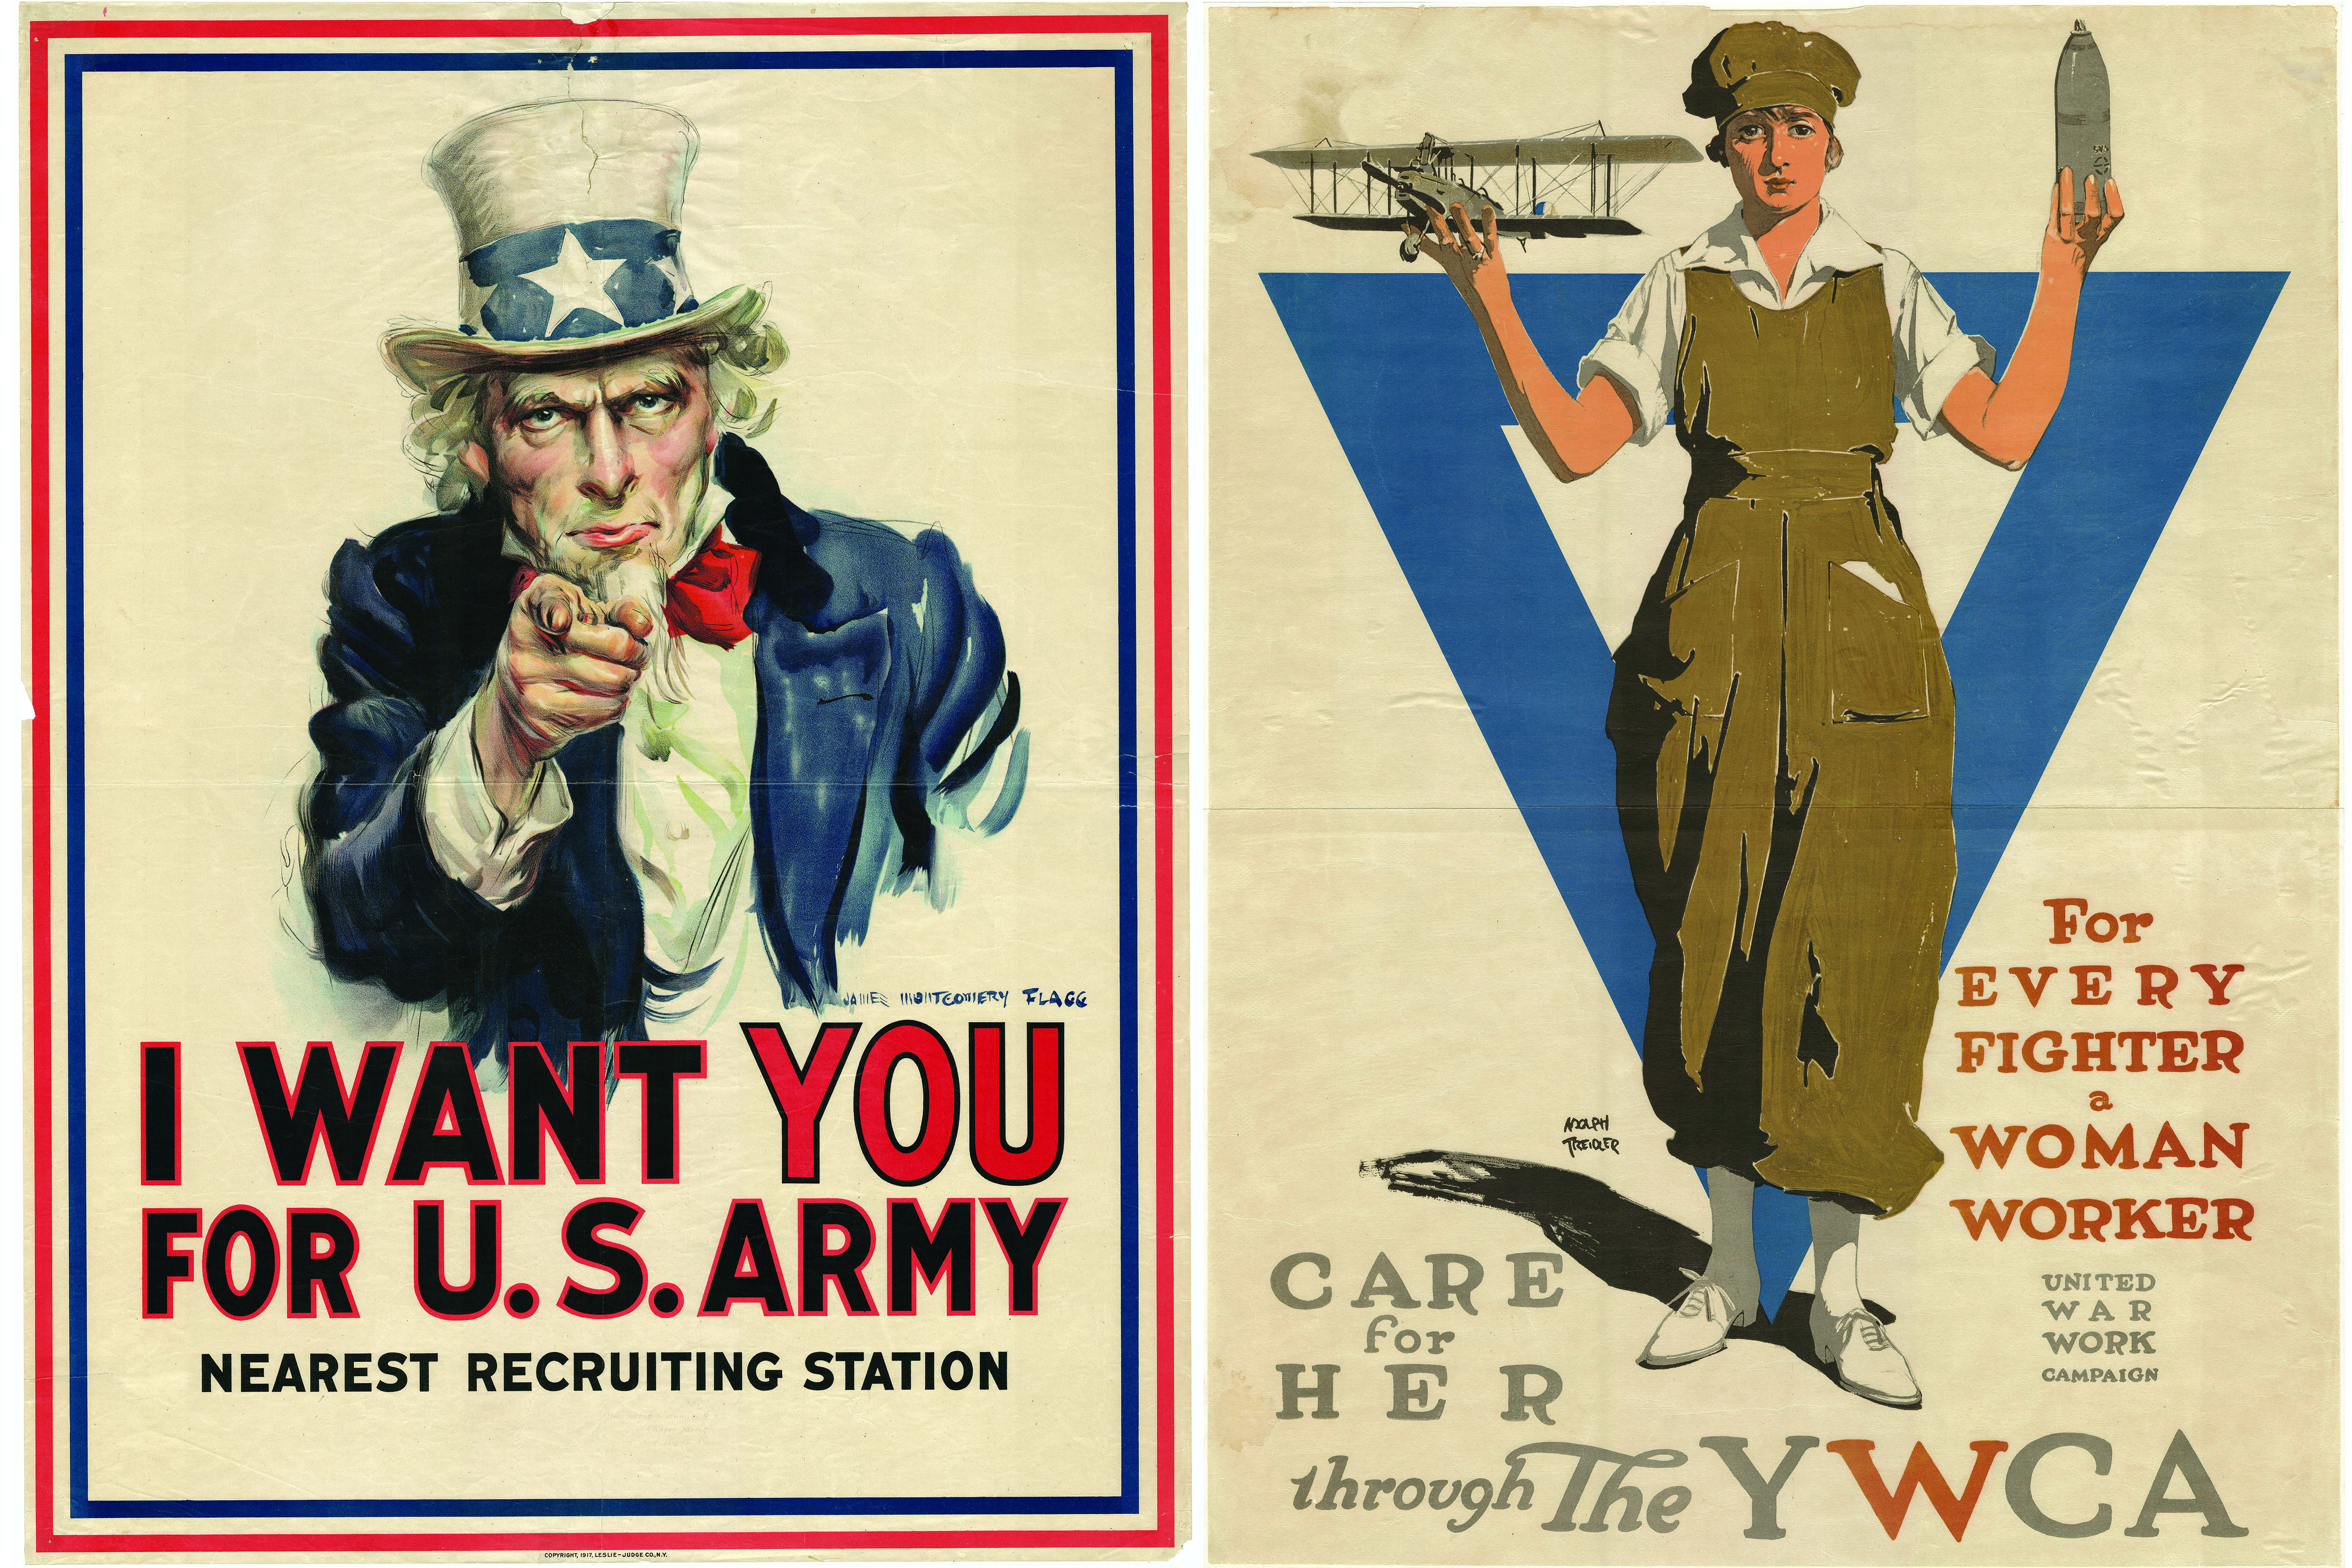 Votv posters. We want you плакат. Us Army плакат. Плакат США I want you. Дядя Сэм i want you for us Army.